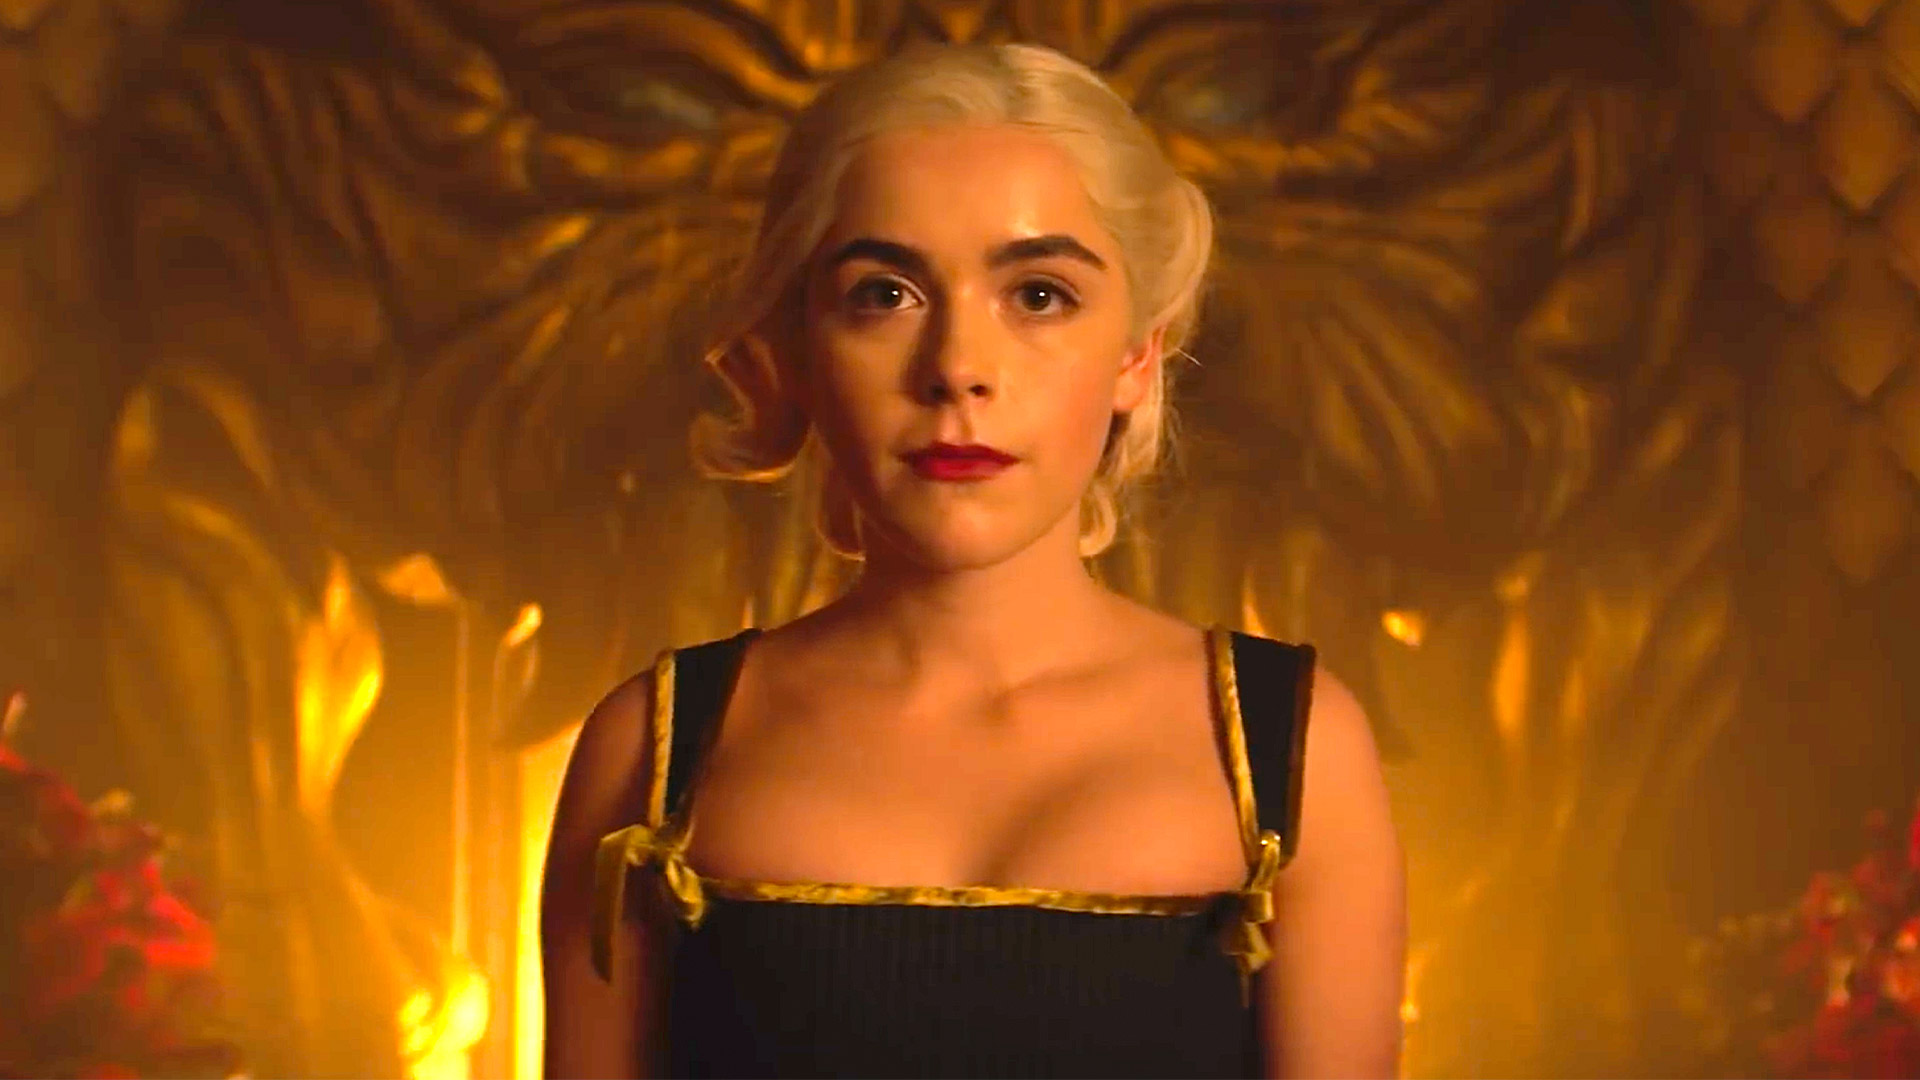 Chilling Adventures of Sabrina: Part 3 on Netflix - Official Trailer